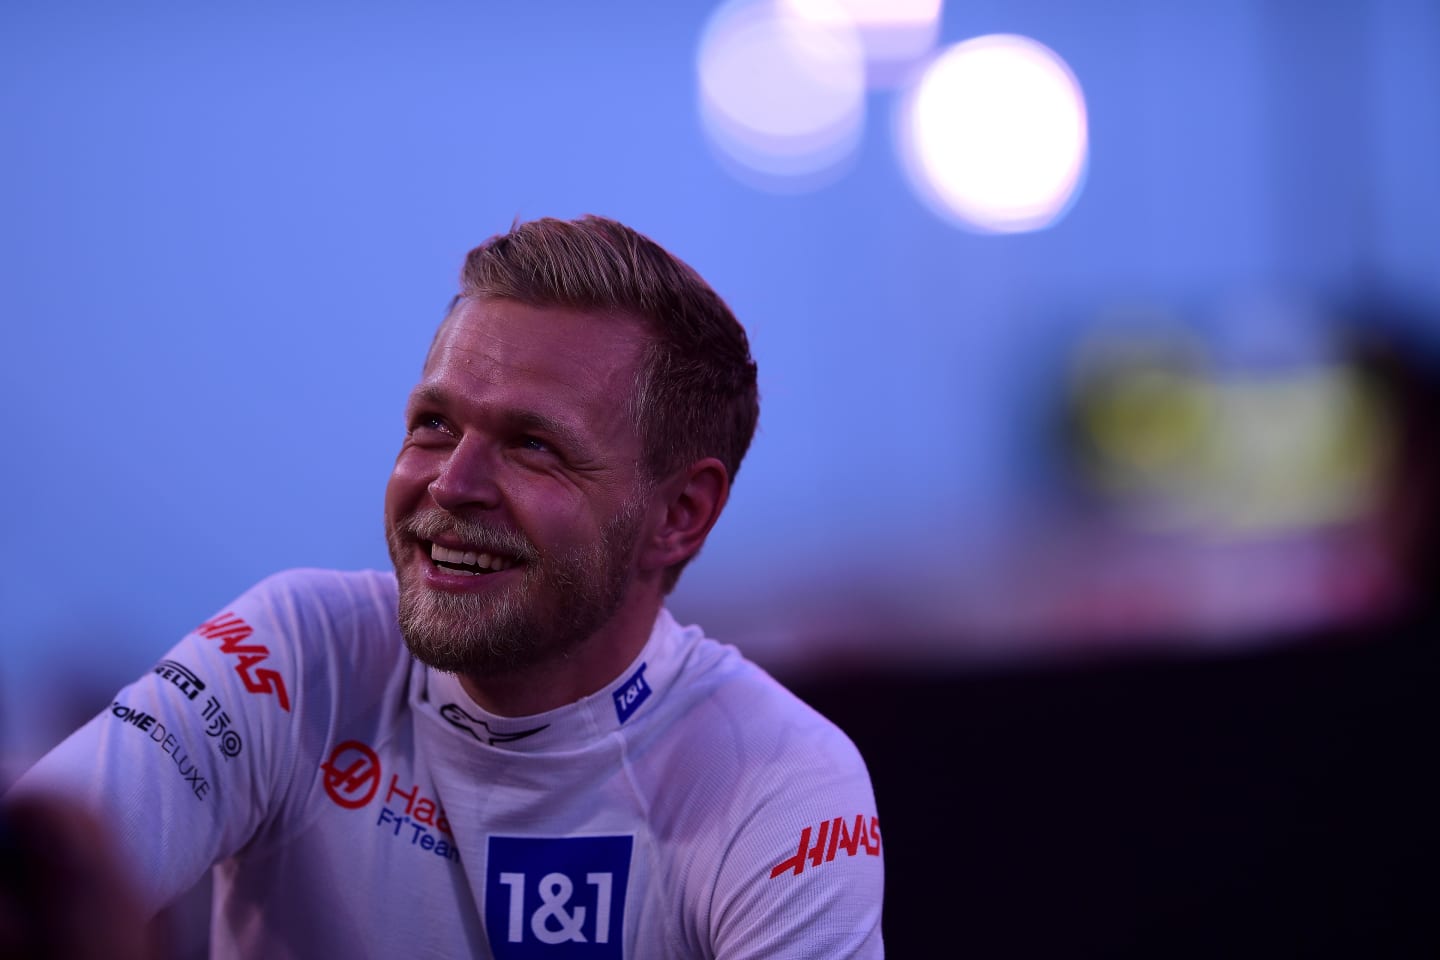 BAHRAIN, BAHRAIN - MARCH 20: Kevin Magnussen of Denmark and Haas F1 looks on from the grid prior to the F1 Grand Prix of Bahrain at Bahrain International Circuit on March 20, 2022 in Bahrain, Bahrain. (Photo by Mario Renzi - Formula 1/Formula 1 via Getty Images)